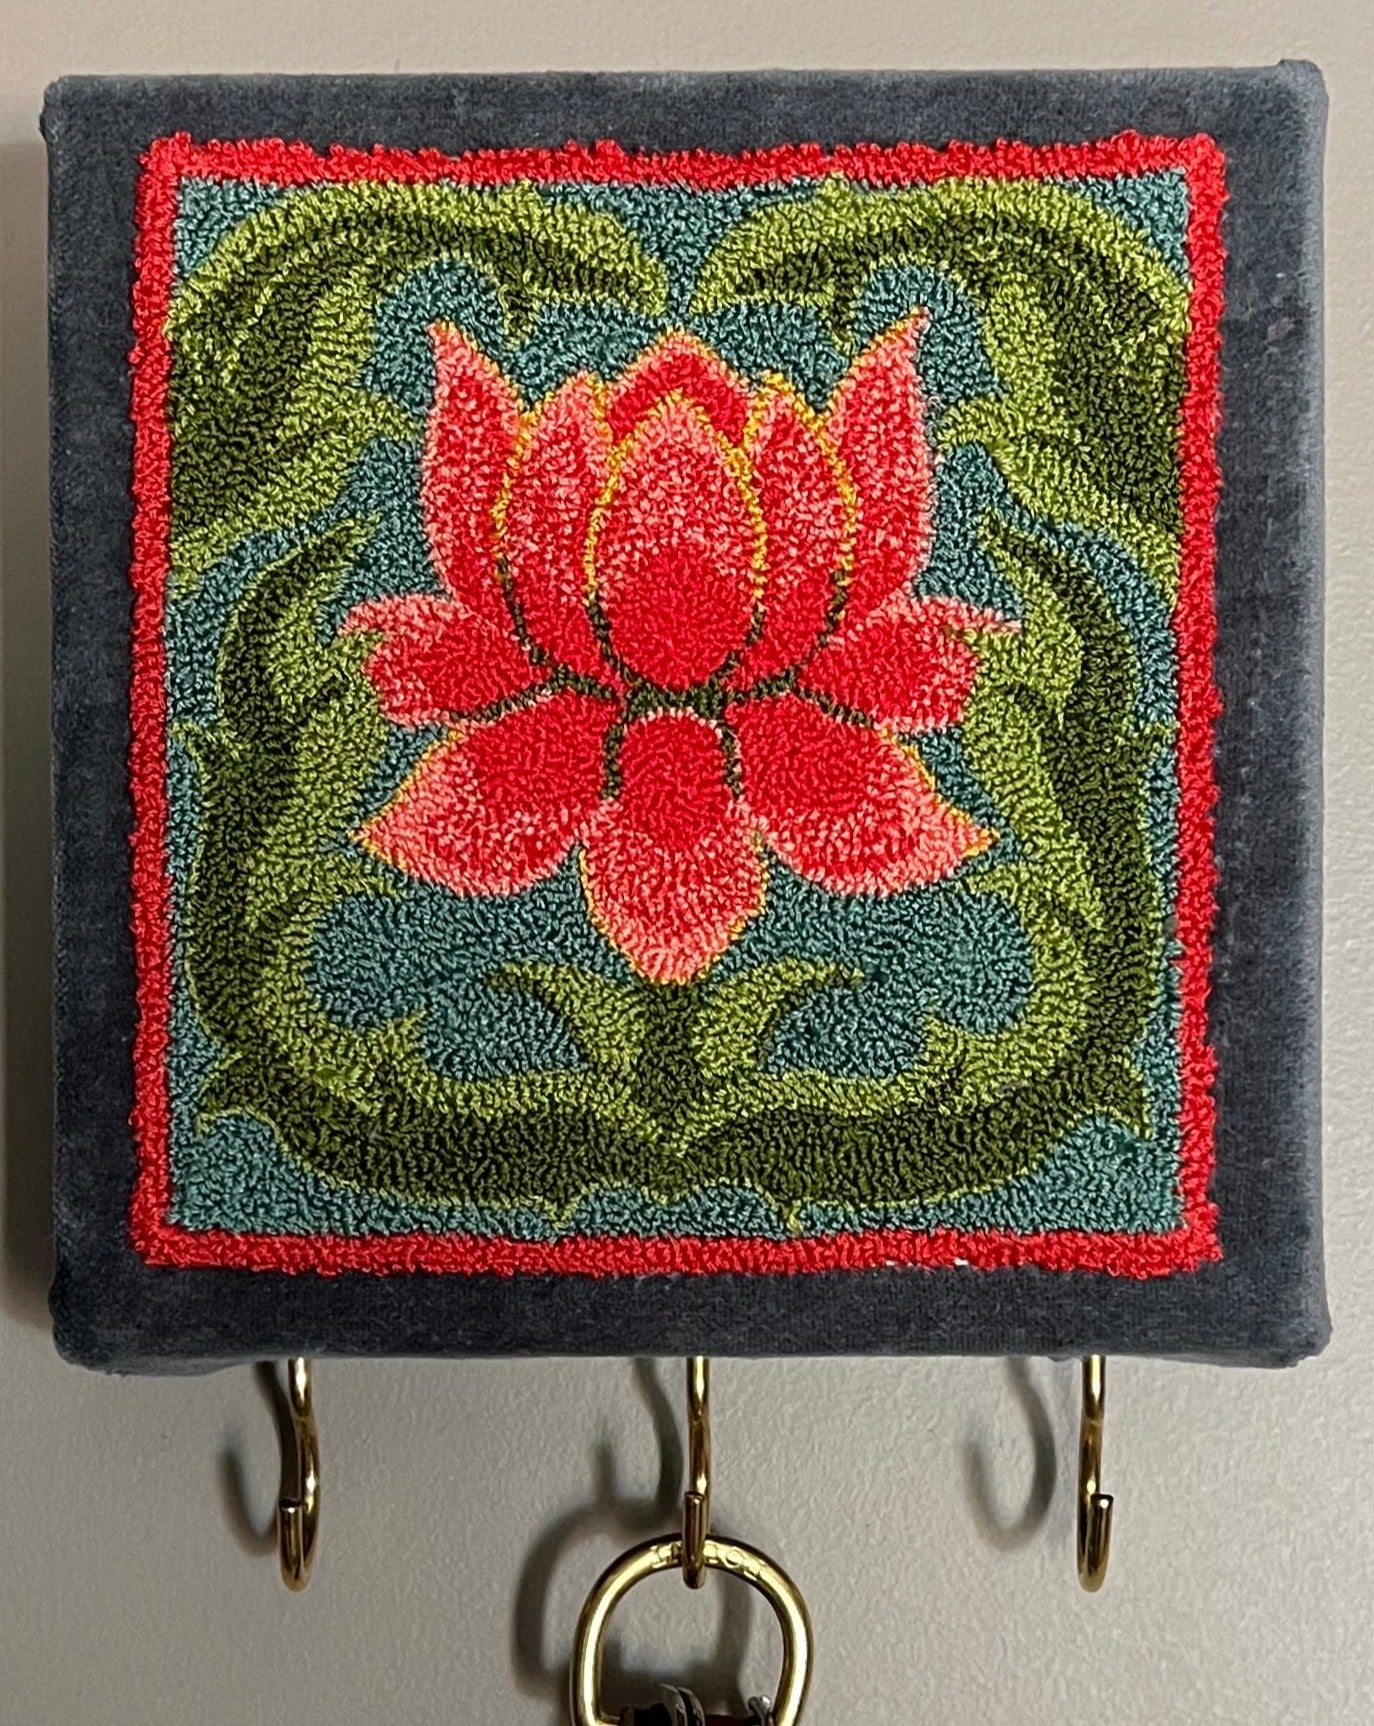 Blooming Punch Needle Pattern by Orphaned Wool. This wonderful design makes a lovely frame design or as shown as a perfect key or jewelry hanger. This design is perfect for the beginner or experienced punch needle artist. Blooming Copyright 2023 Kelly Kanyok/Orphaned Wool